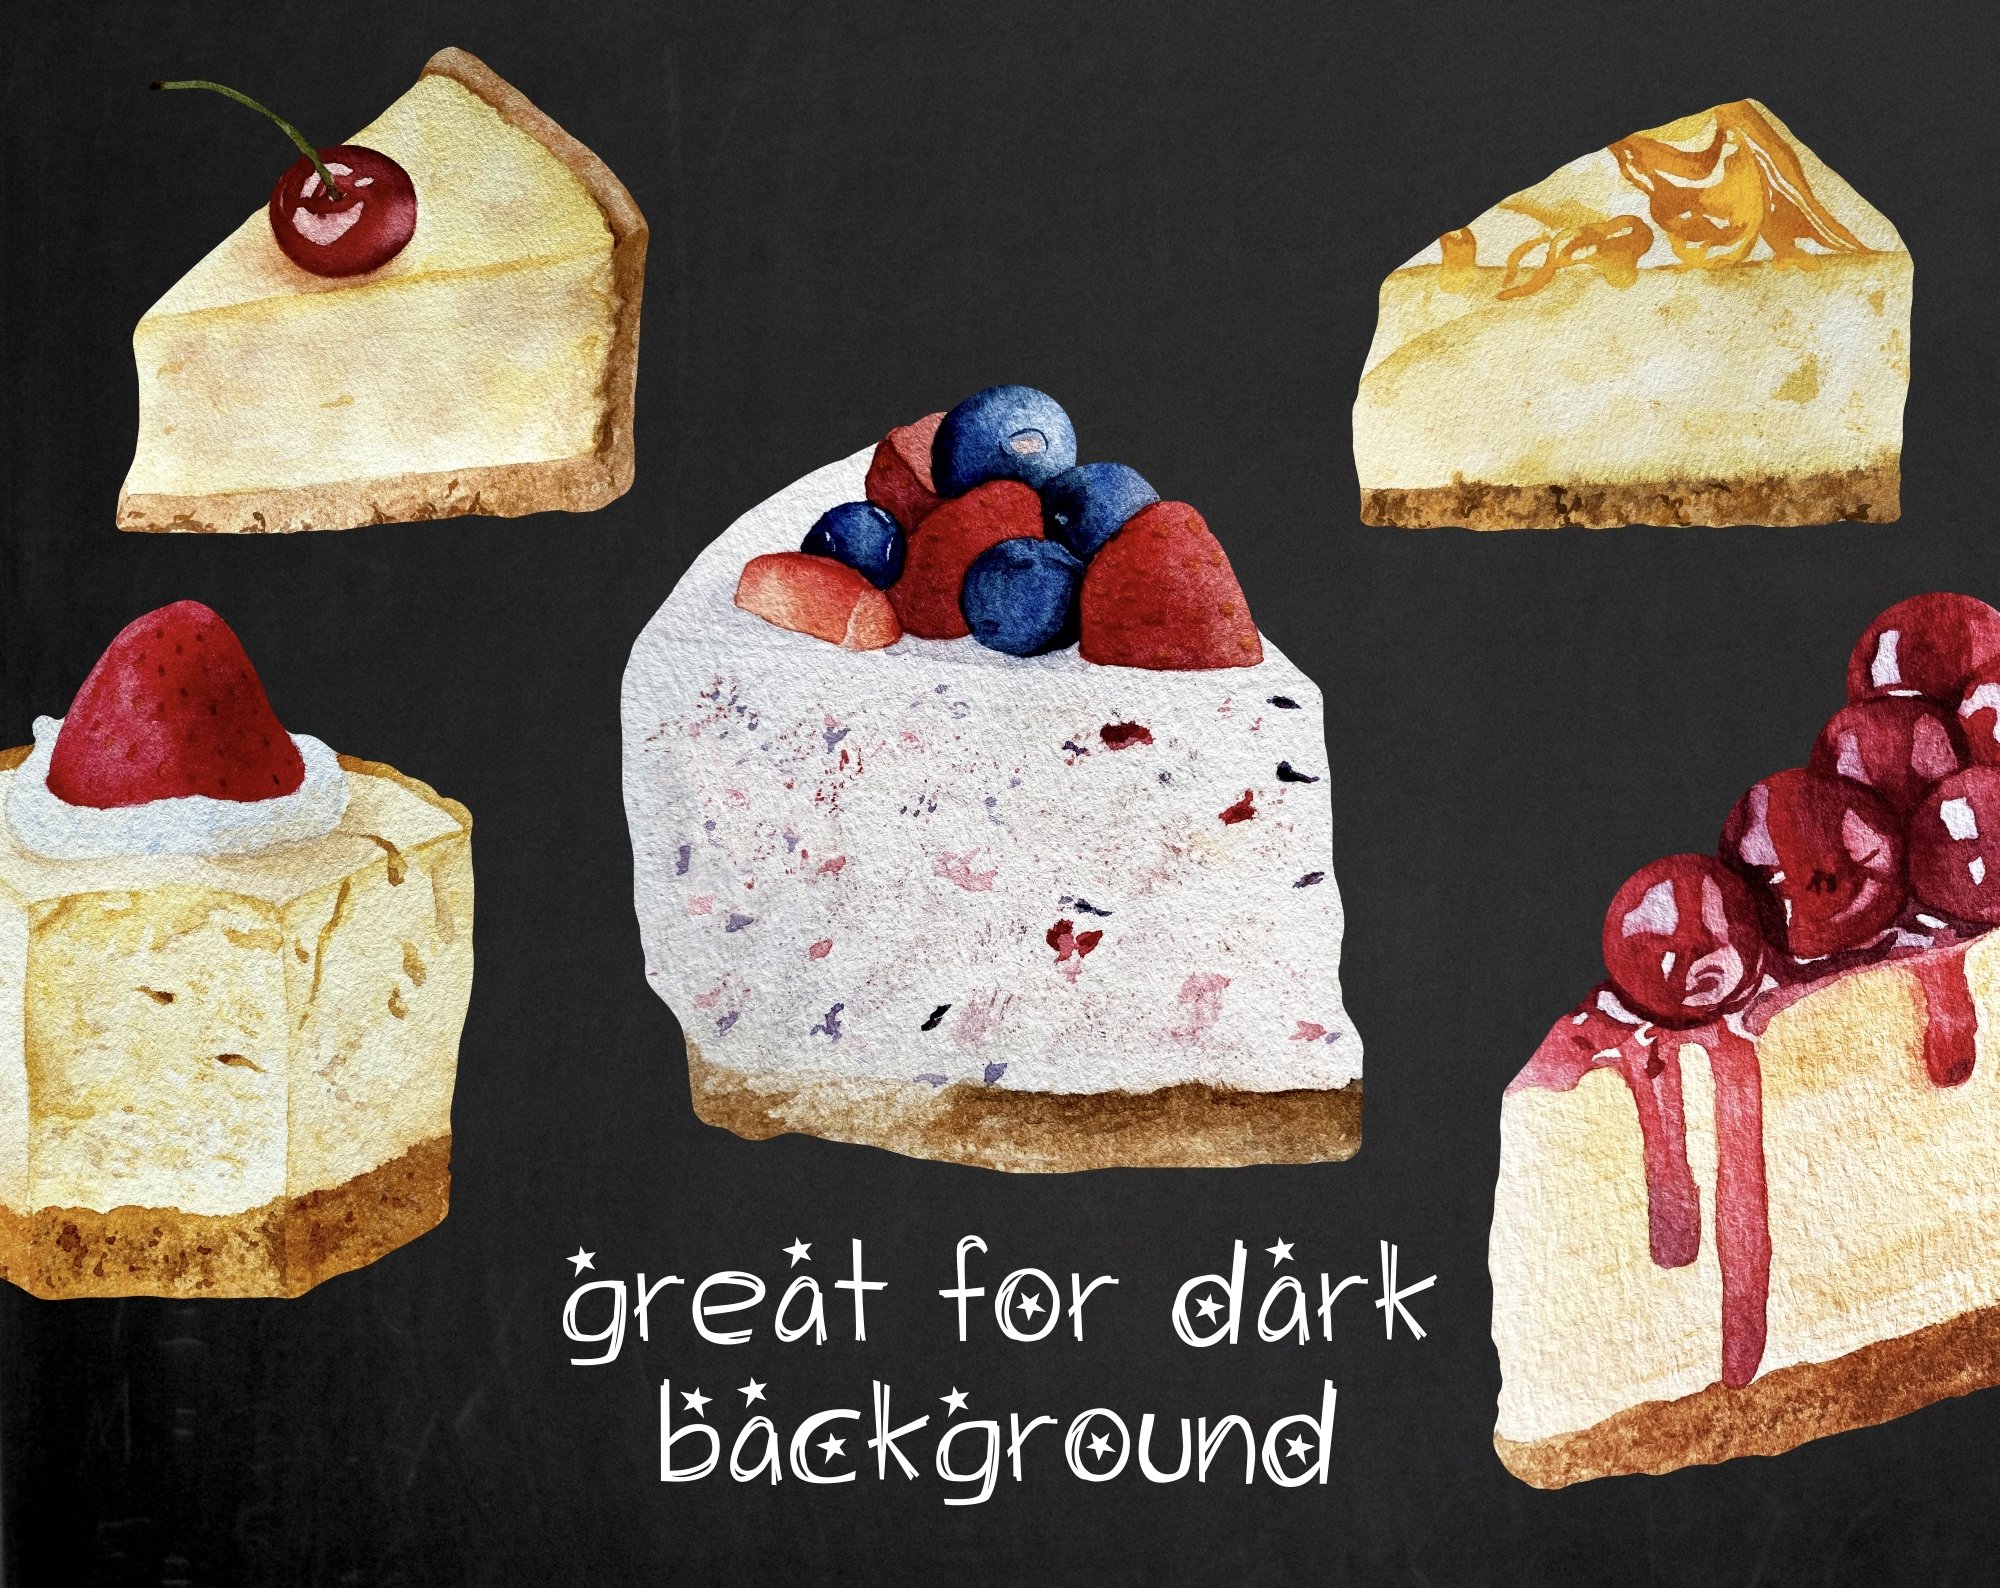 Charming set of images of cottage cheese desserts on a black background.